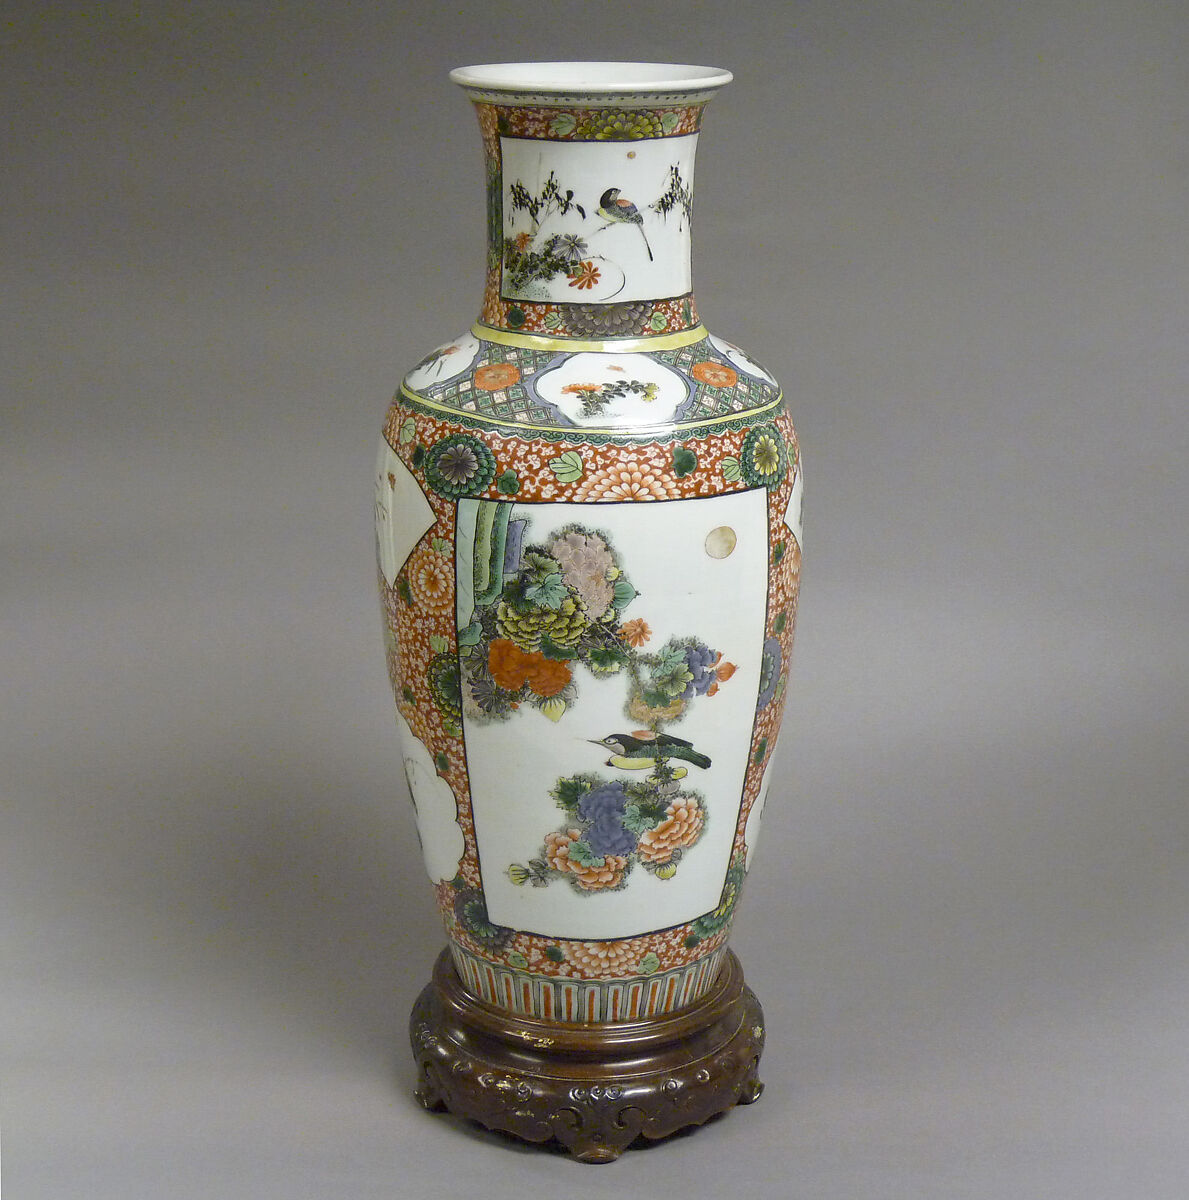 Vase decorated with flowers and birds, Porcelain painted with colored enamels over transparent glaze, and colored enamels over "fire-red” glaze (Jingdezhen ware), China